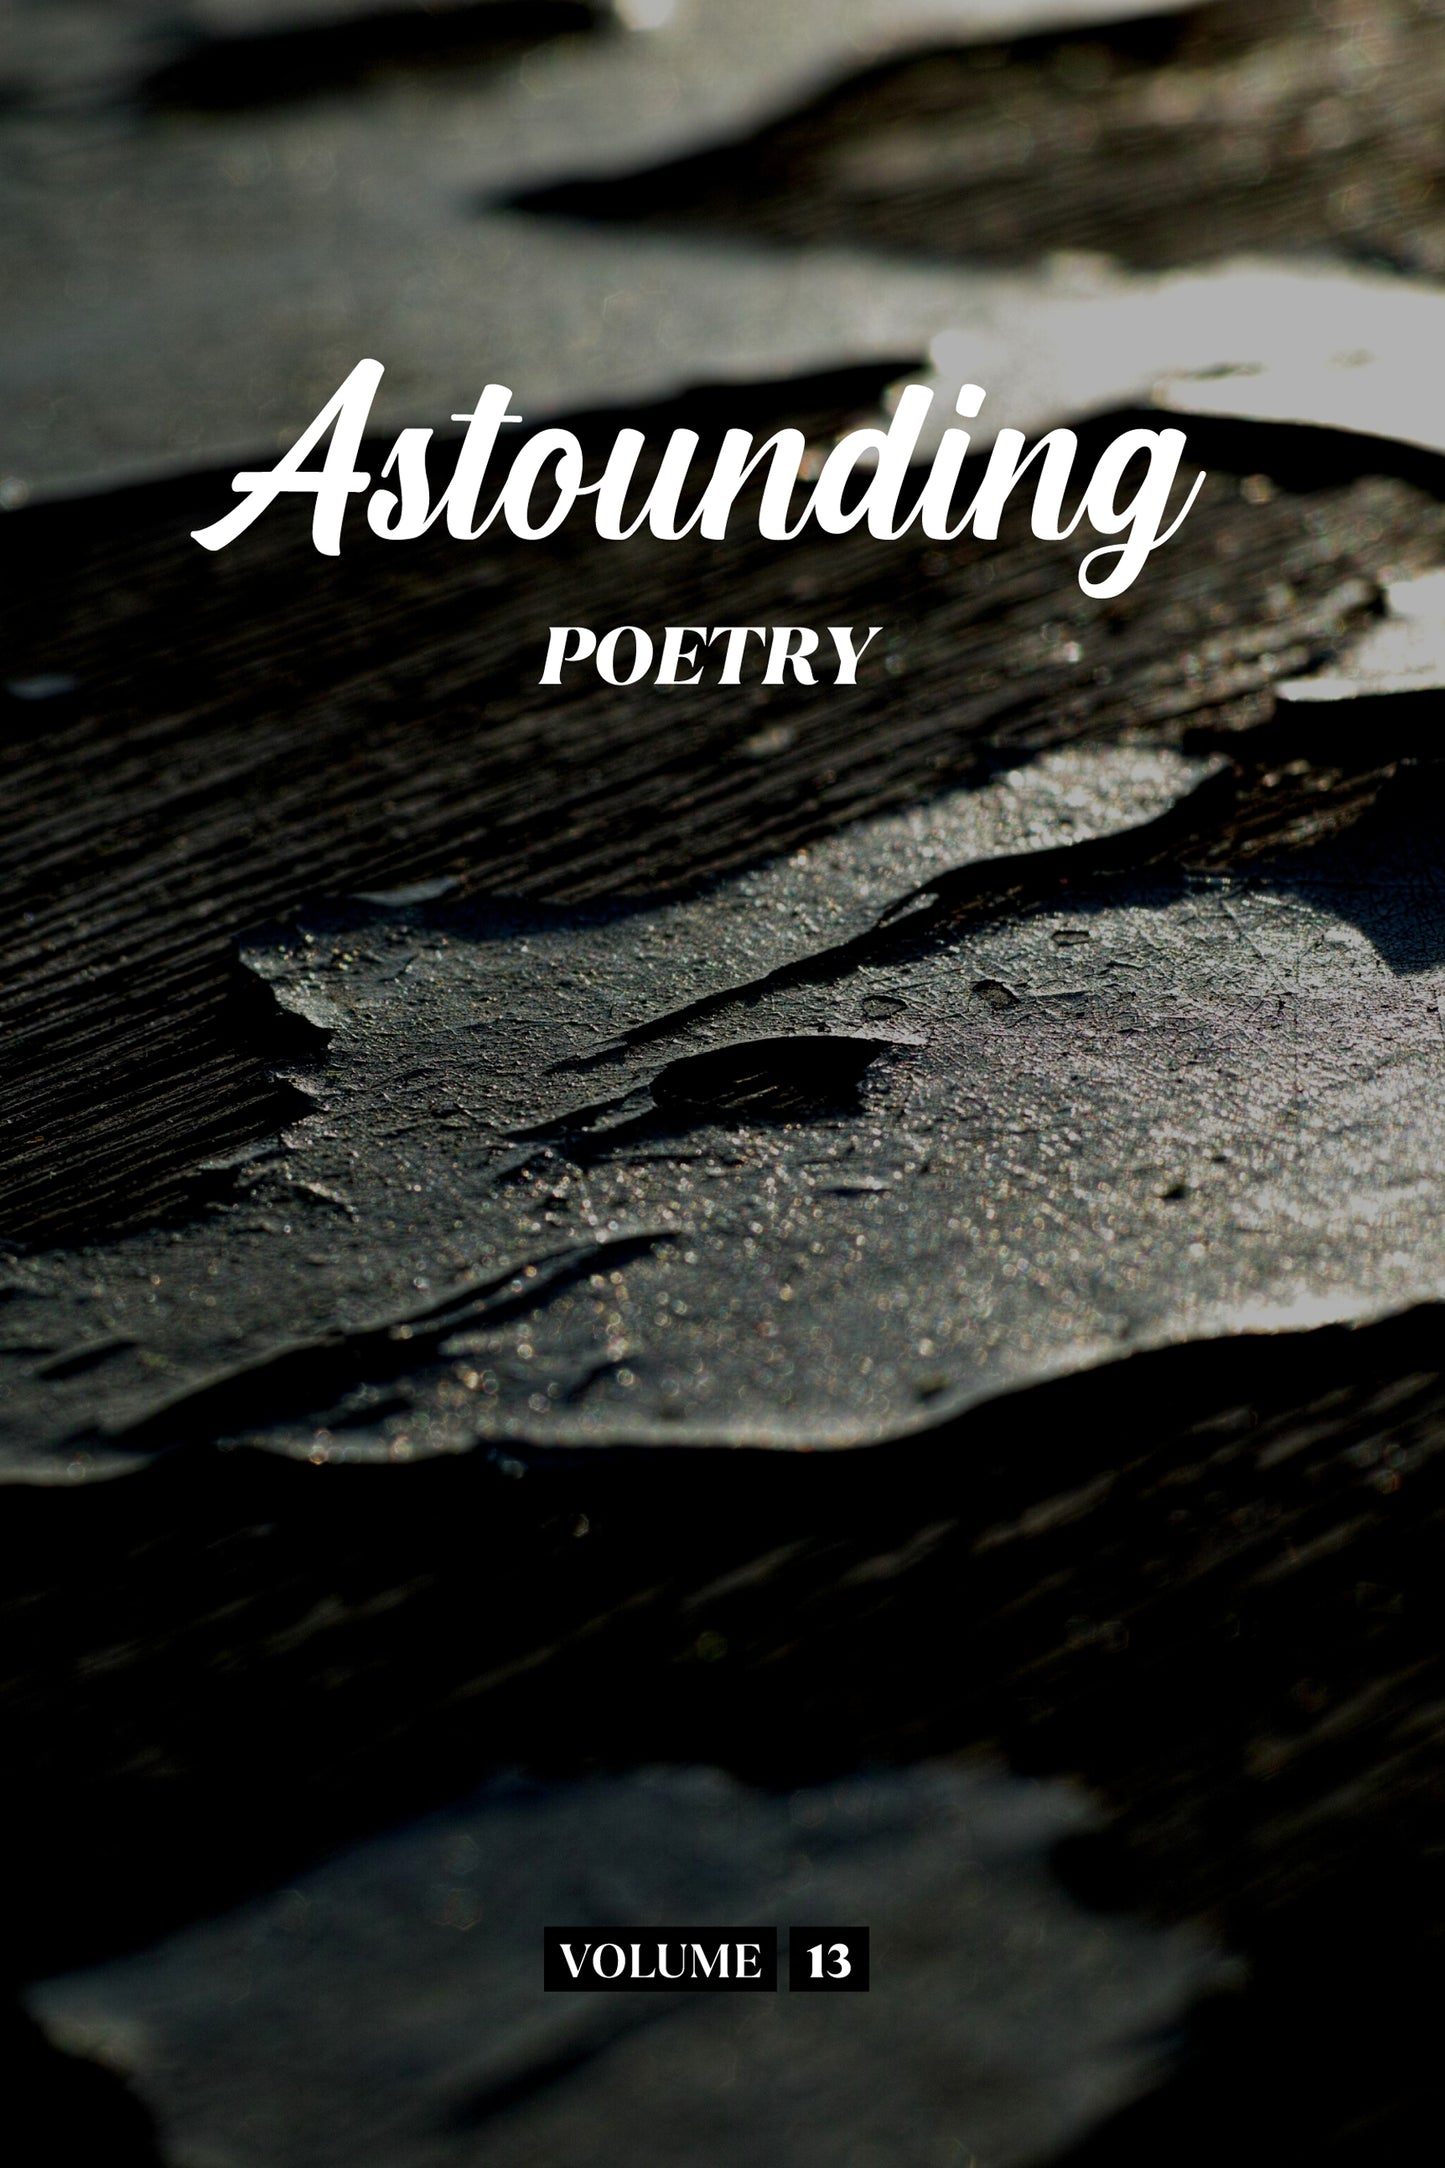 Astounding Poetry (Volume 13) - Physical Book